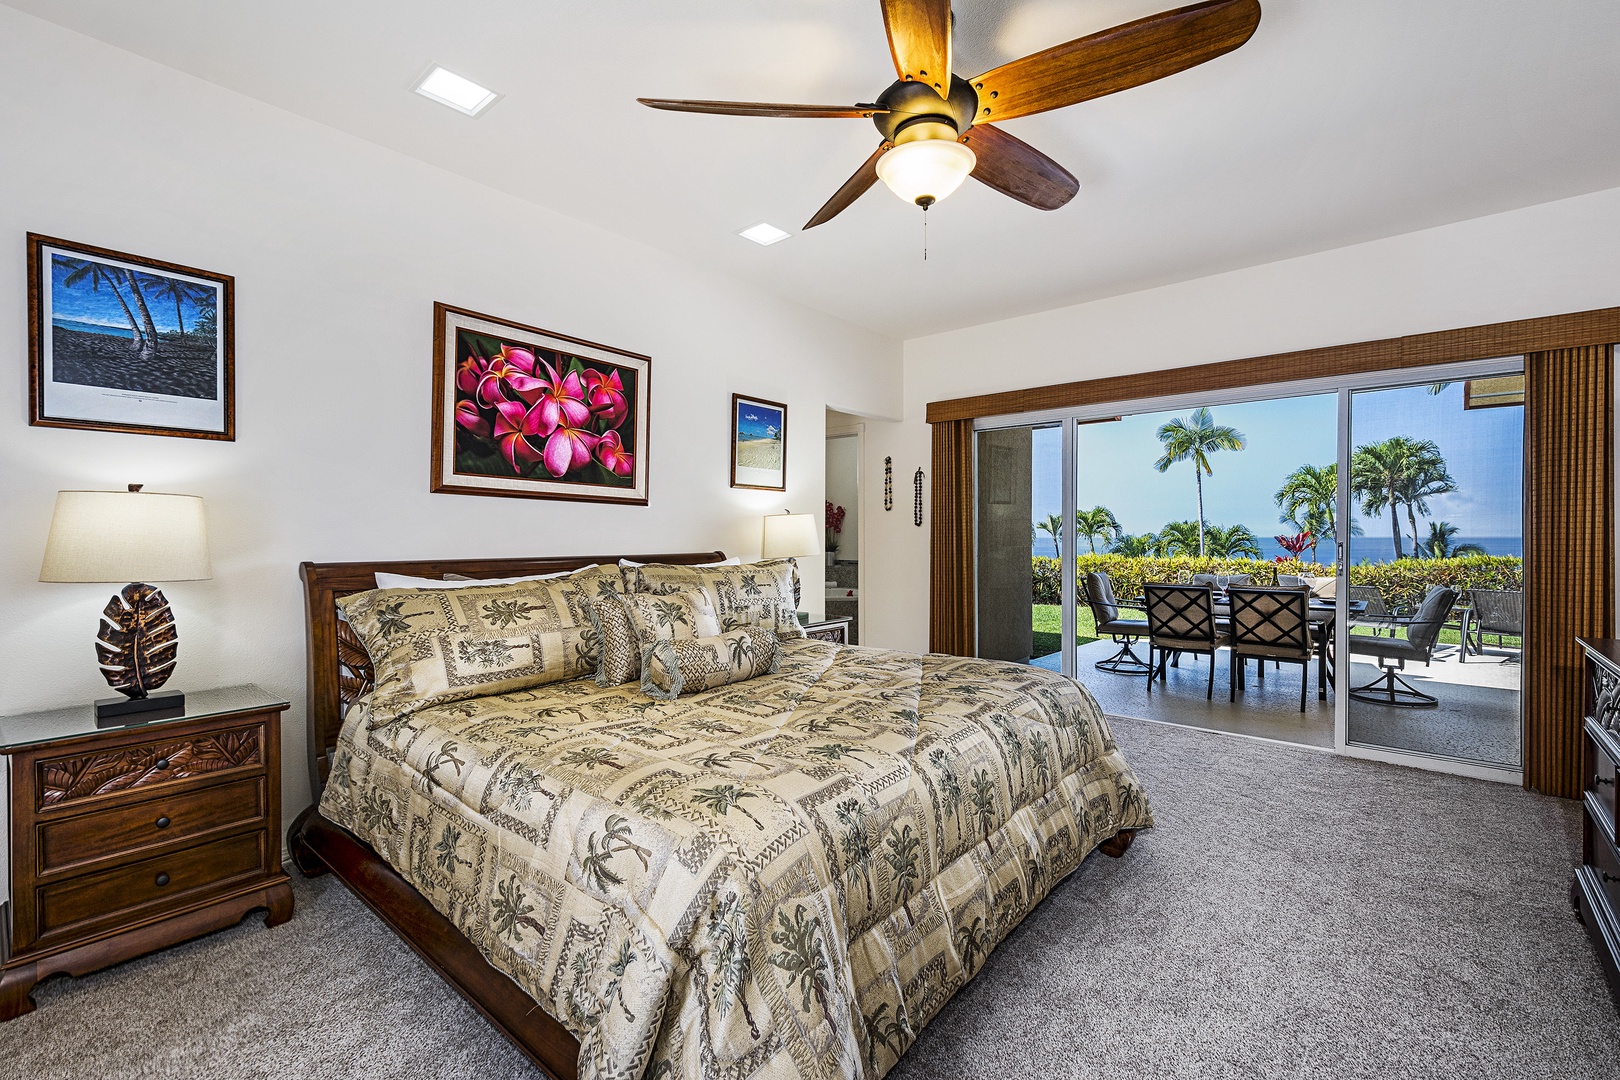 Kailua Kona Vacation Rentals, Maile Hale - Primary bedroom featuring A/C and King bed with cable TV